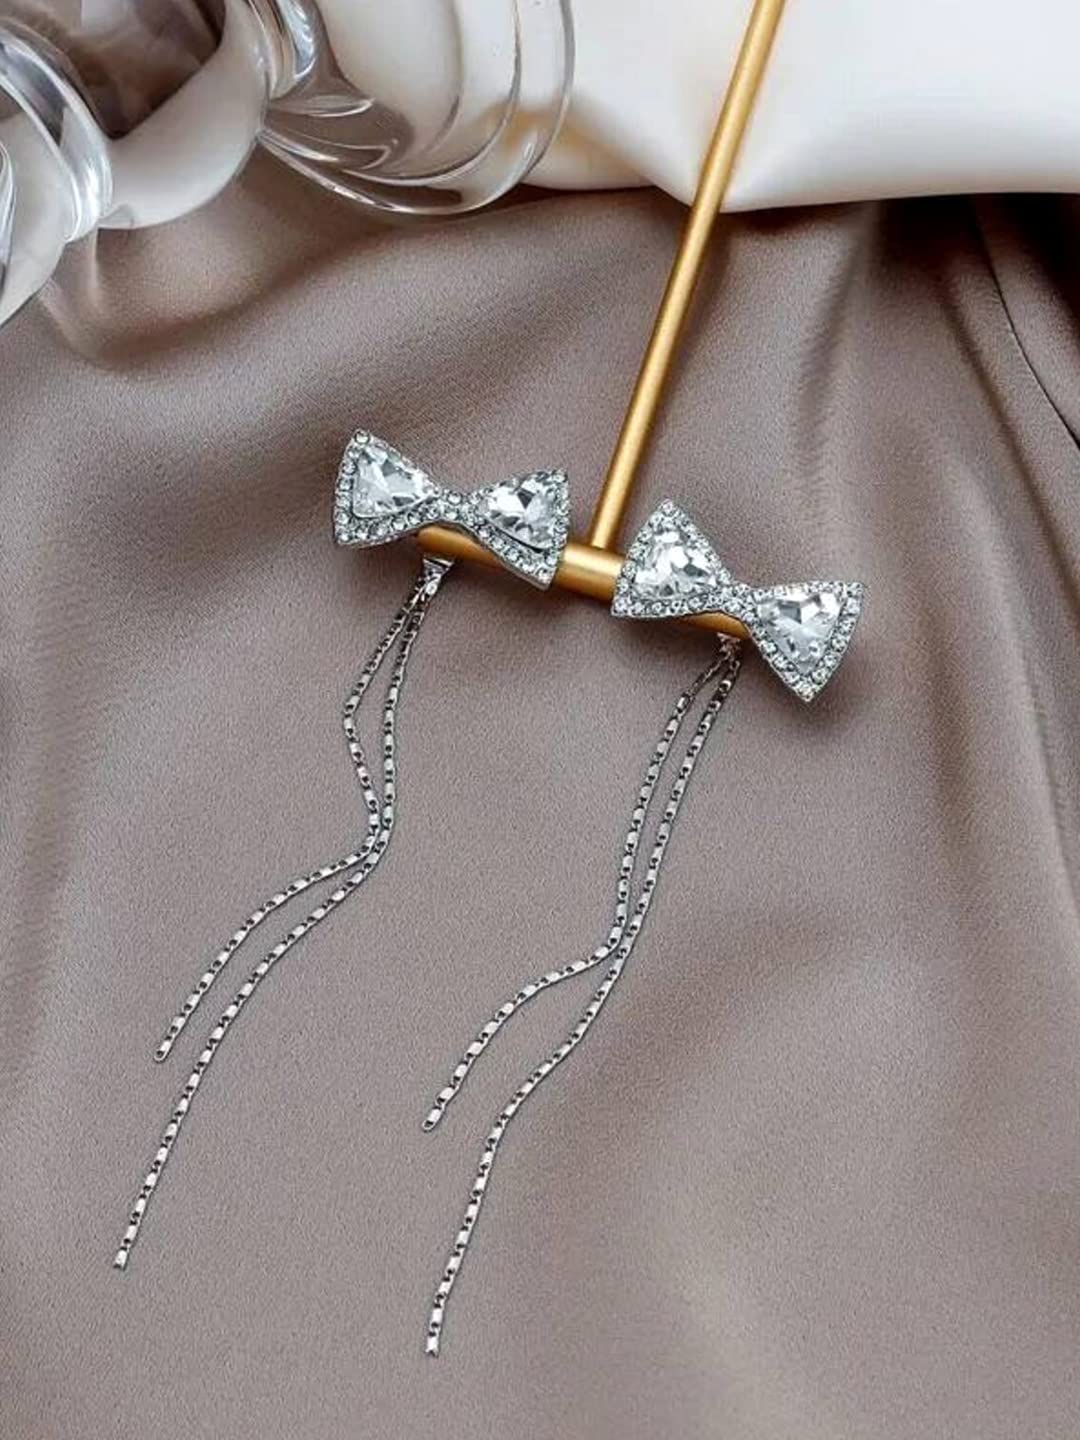 Yellow Chimes Earrings For Women Silver Tone Crystal Studded Bow With Linear Chain Tassel Dangler Earrings For Women and Girls